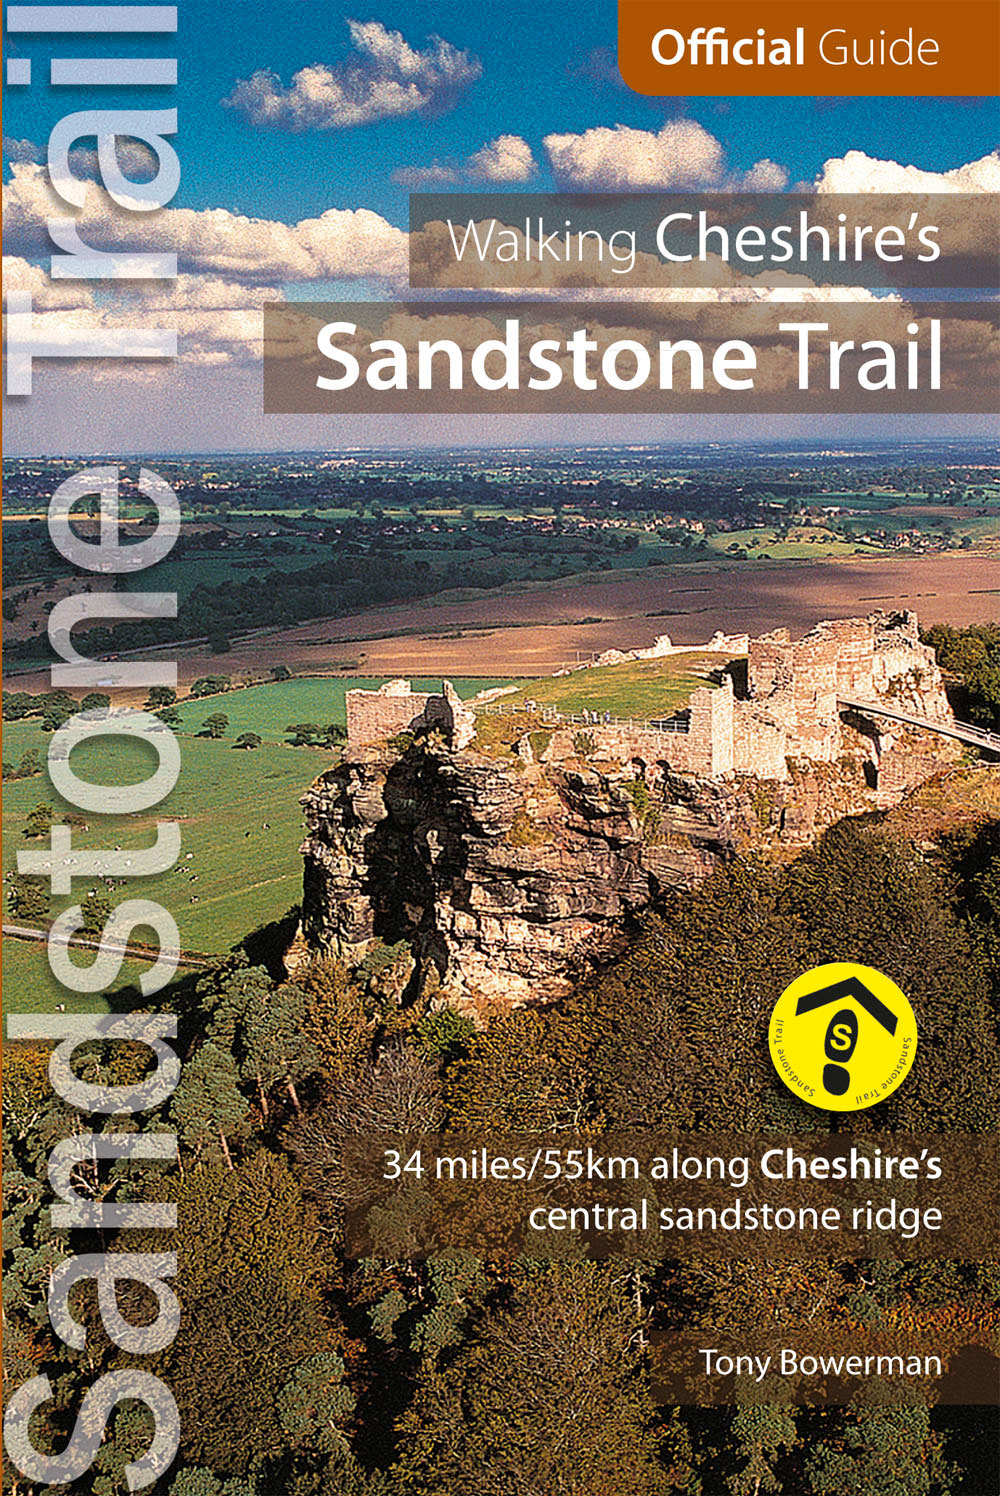 Walking Cheshire's Sandstone Trail - the Official Guide